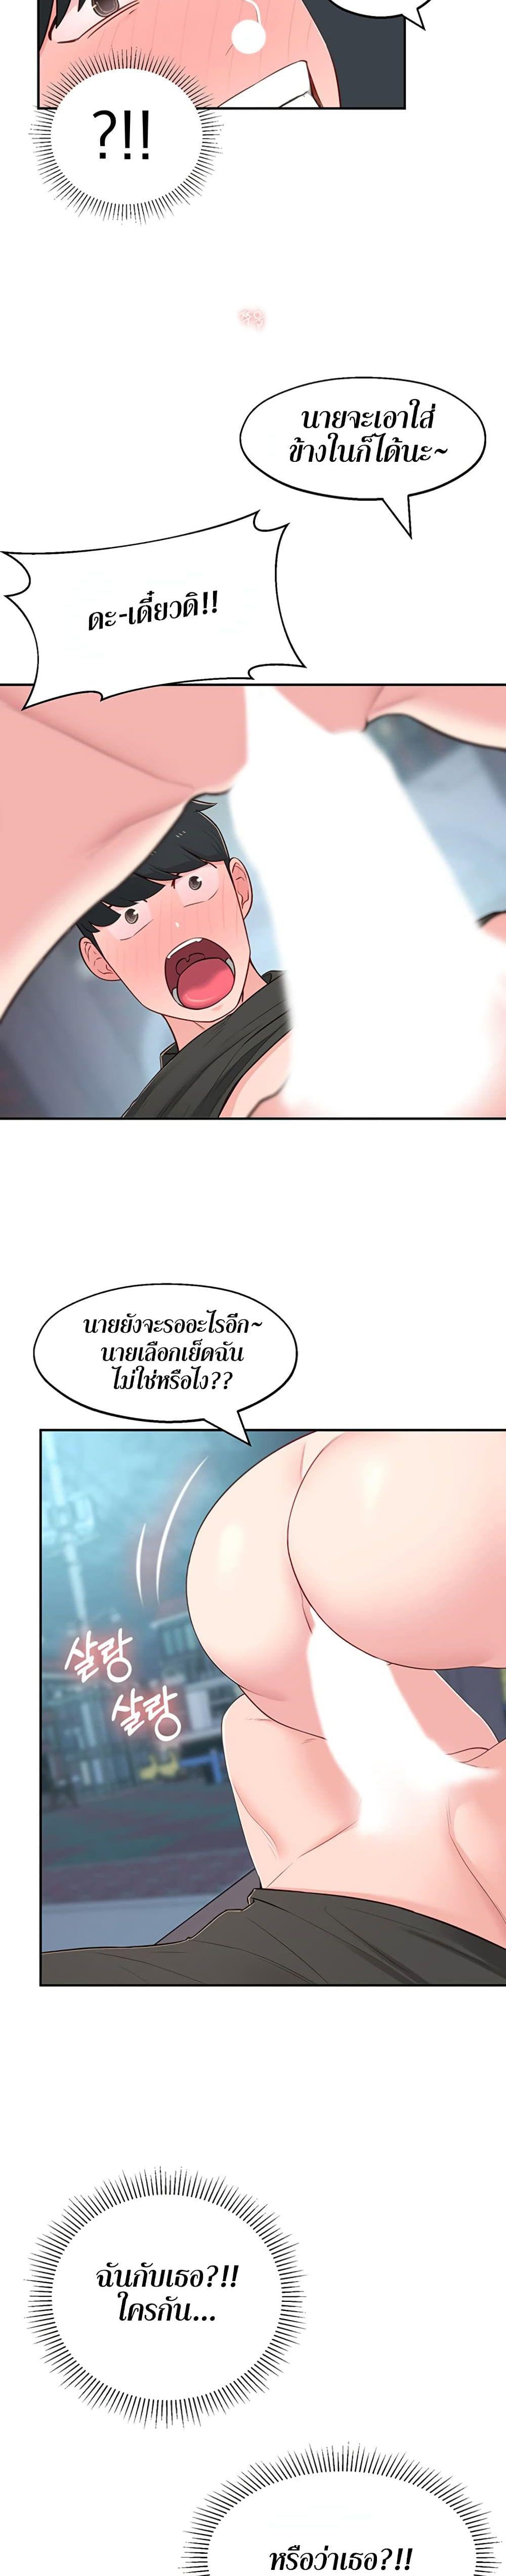 A Knowing Sister 13 ภาพ 27